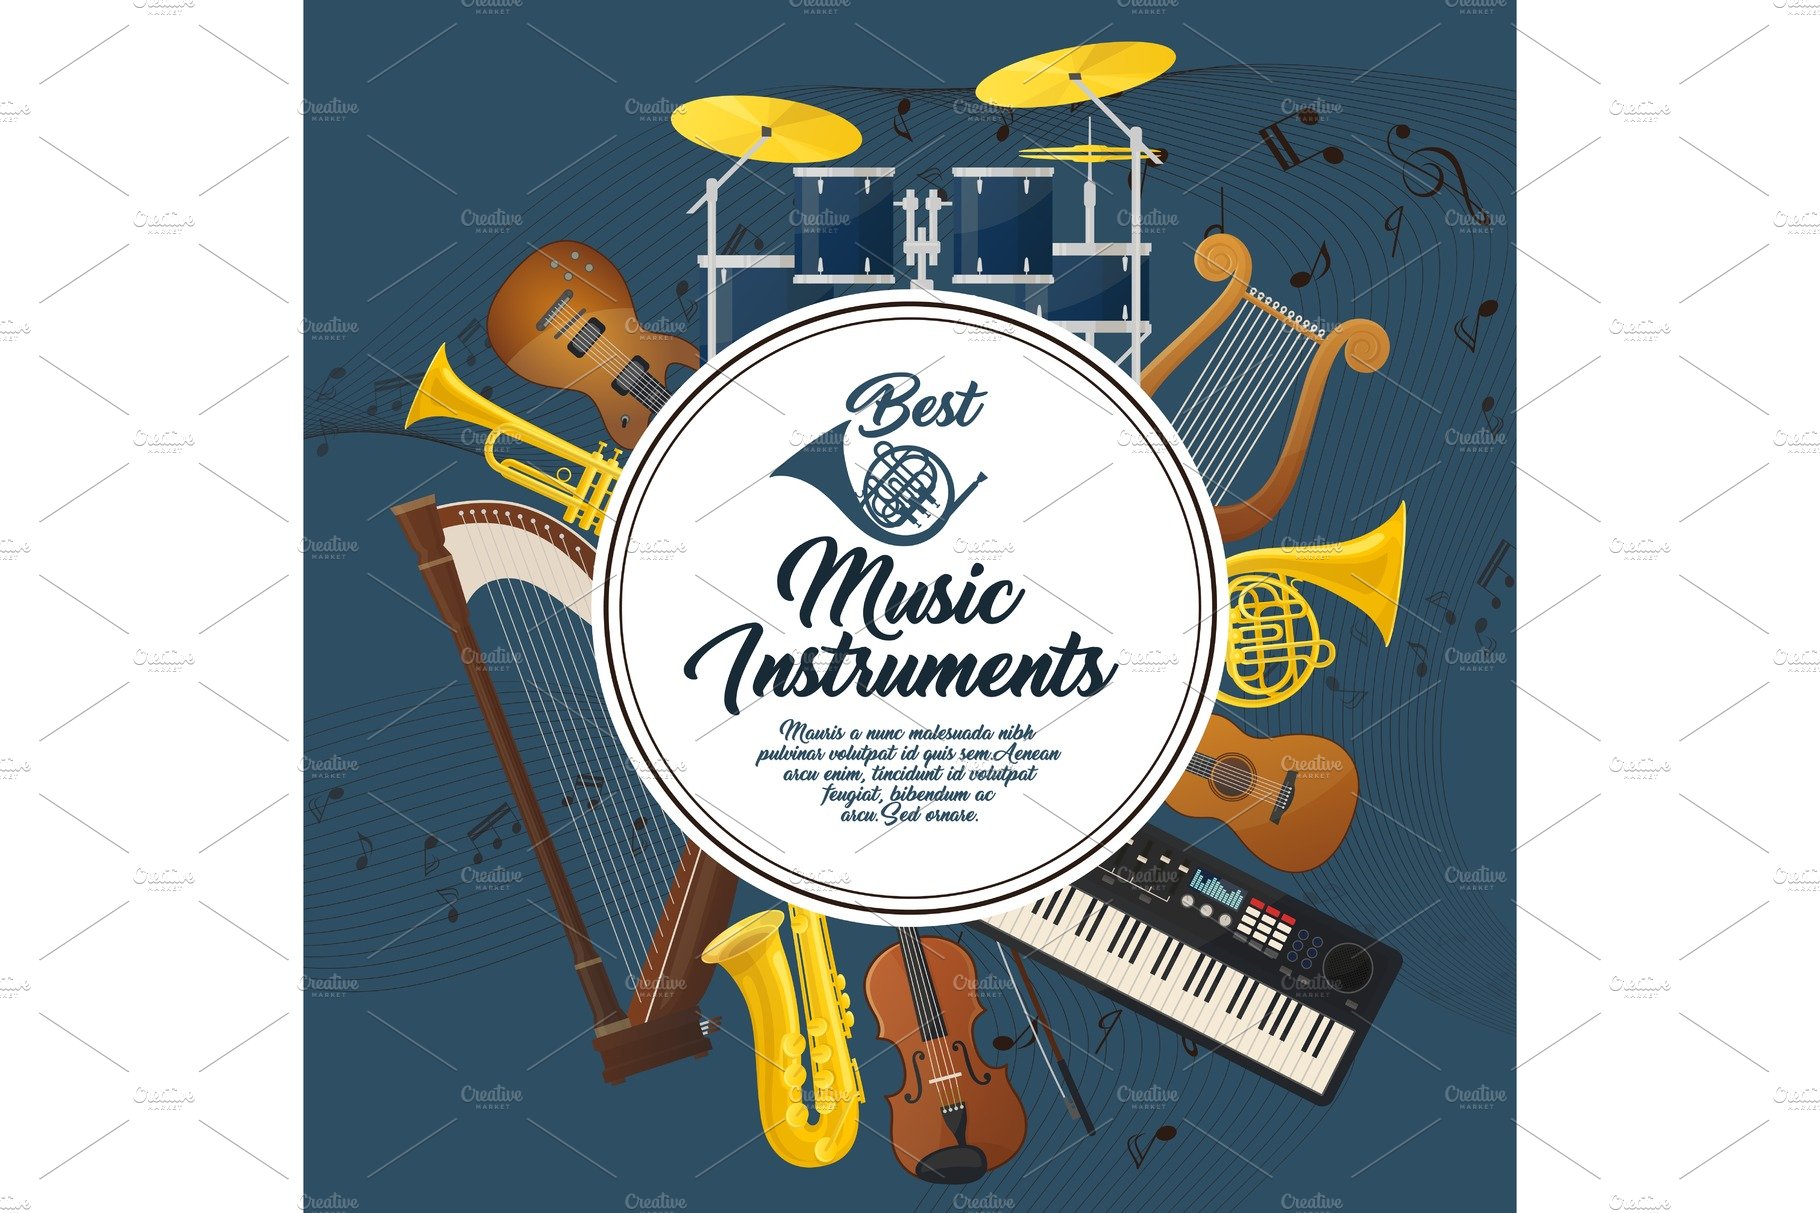 Sound equipment and music instruments with notes cover image.